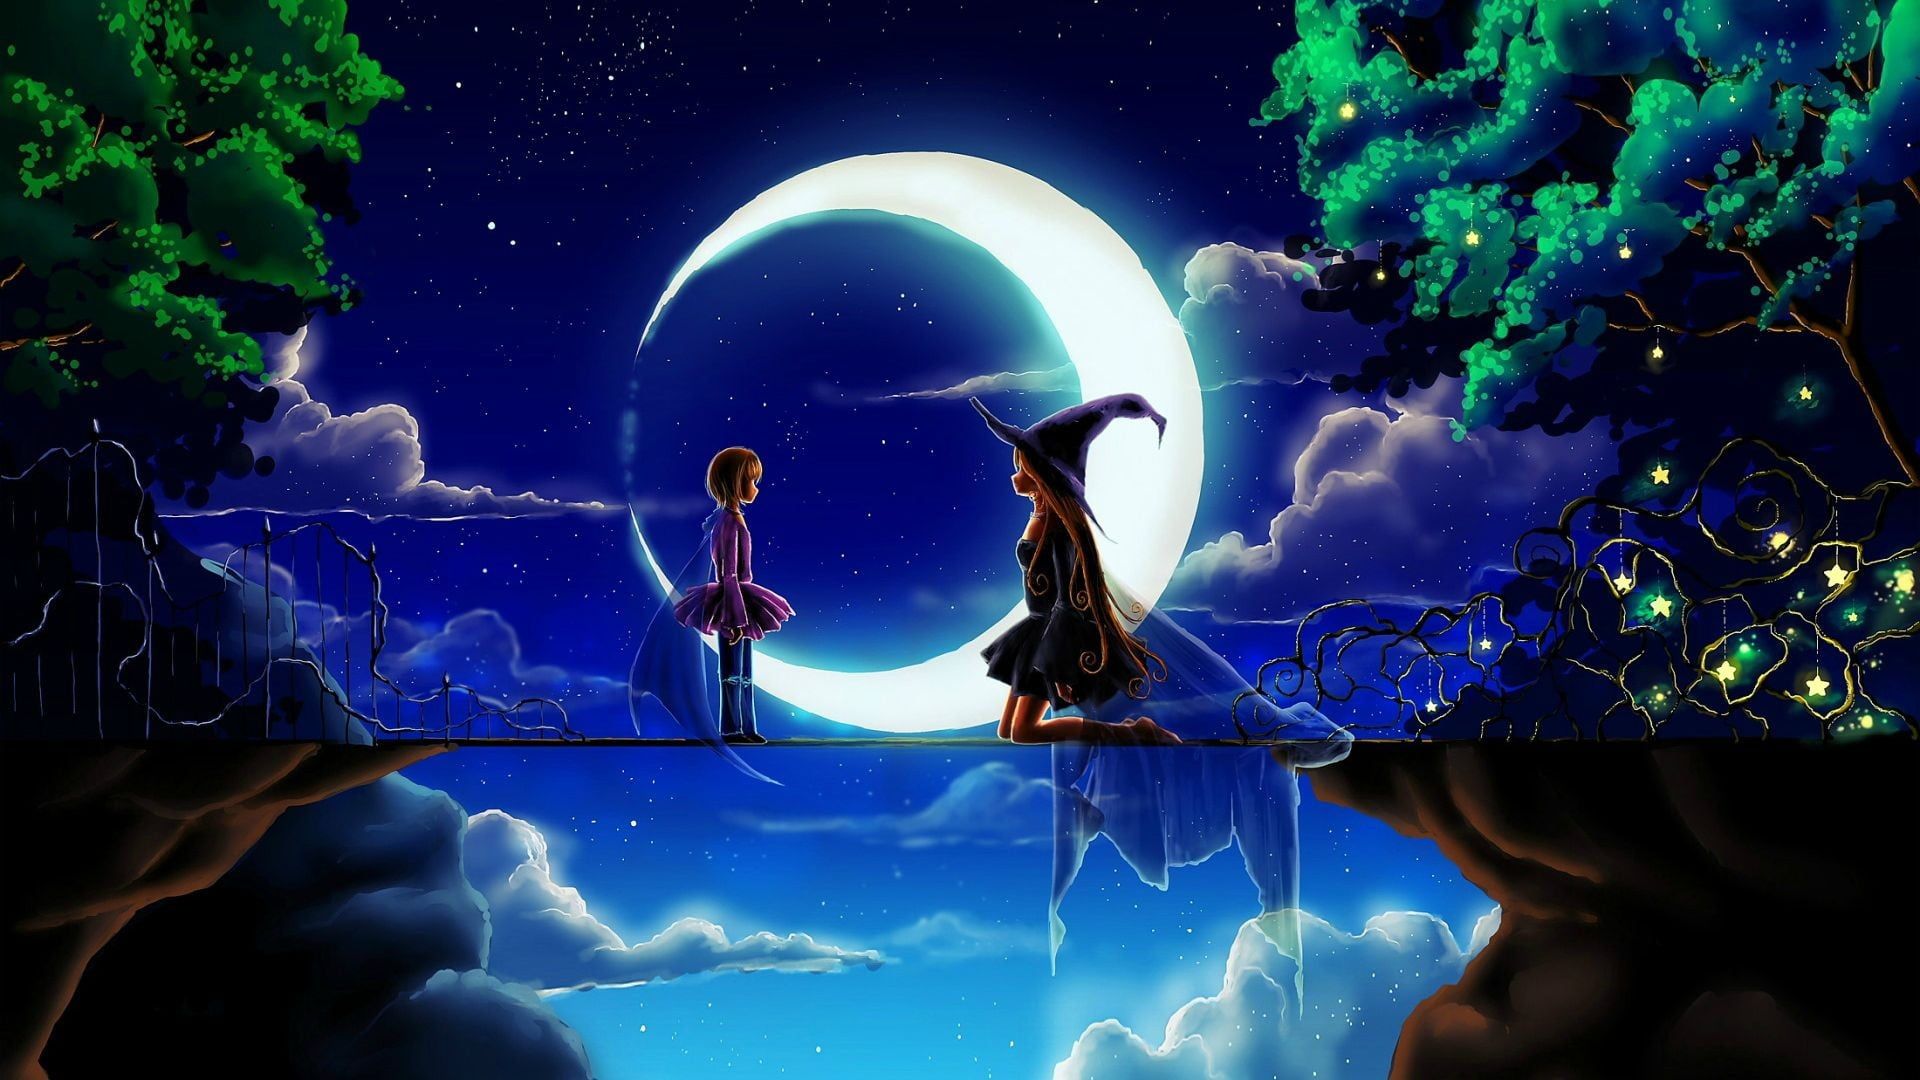 Girl and witch wallpaper, anime, anime girls, night, sky HD